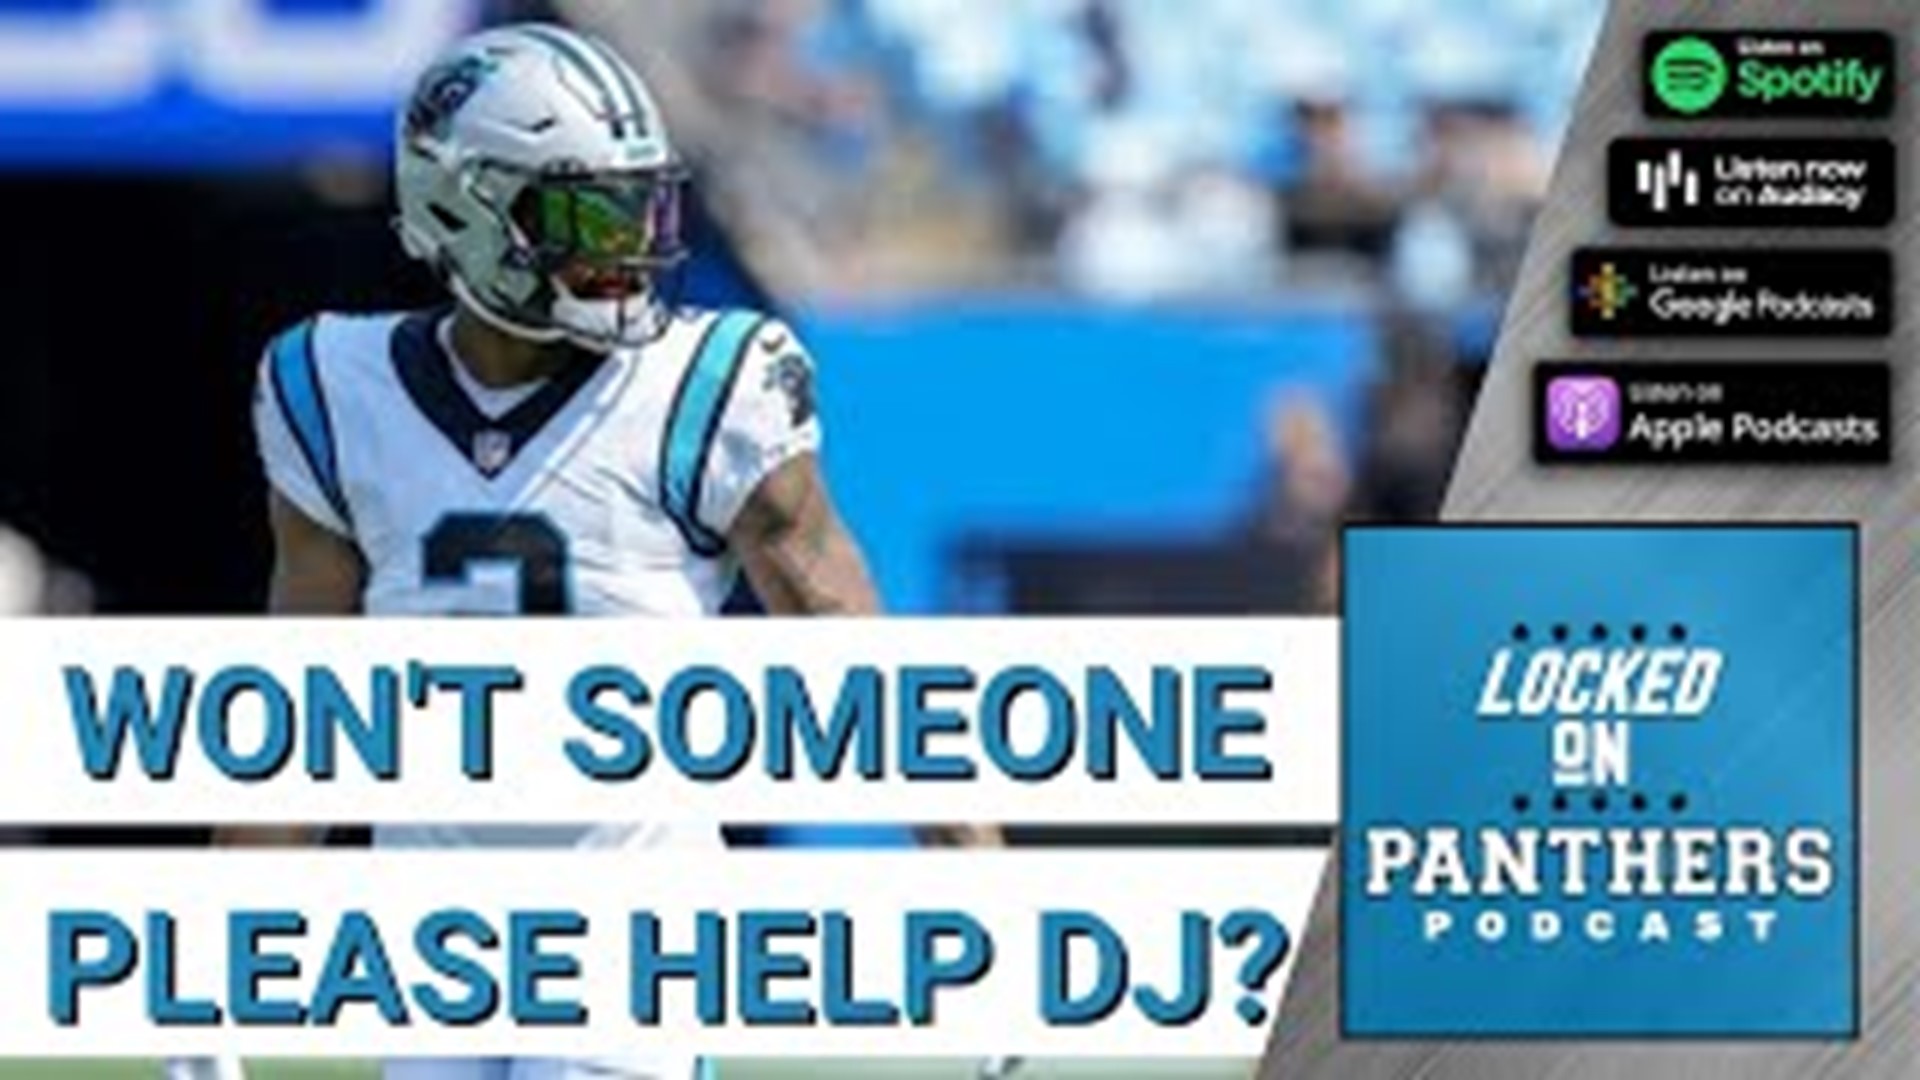 Julian Council provides his thoughts on where things stand for the Carolina Panthers quarterback, running back, and wide receiver rooms heading into the 2022 season.